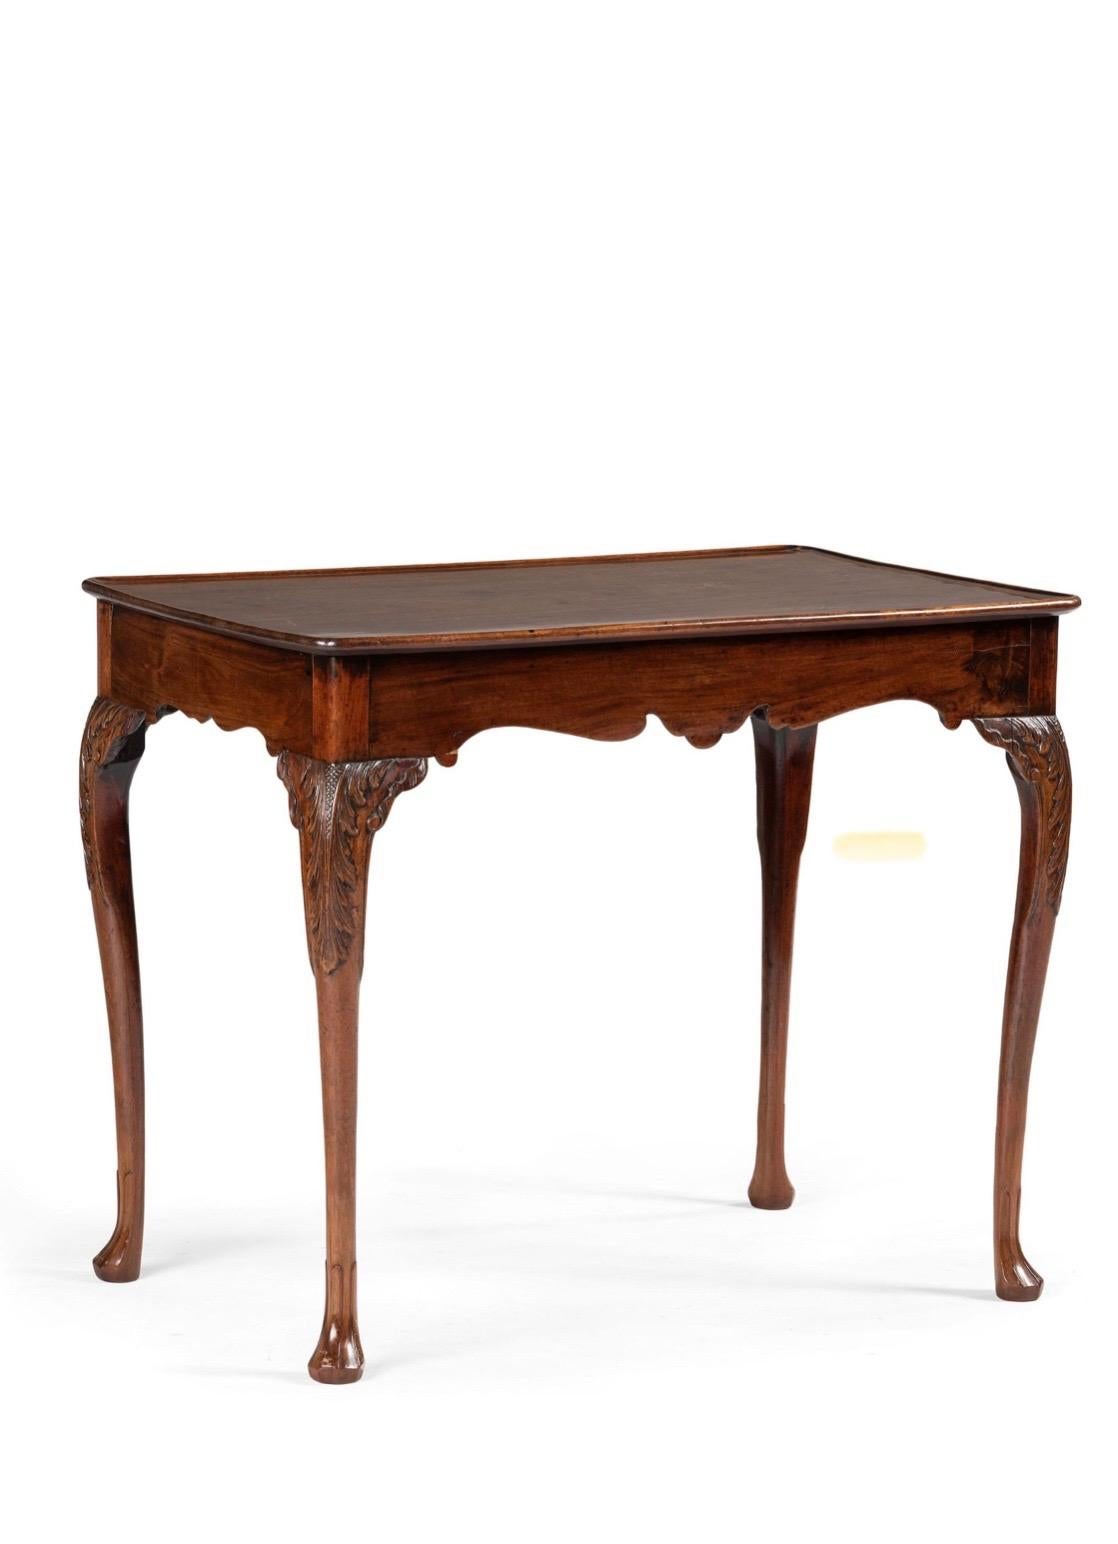 Irish George III carved mahogany dished top tea table, 18th century
Beautifully hand carved foliage, slightly curved cabriole tapered legs on padded feet. 
Old Tag from Edward Butler Antiques & Fine Art Galleries, 14 Bachelor's Walk,